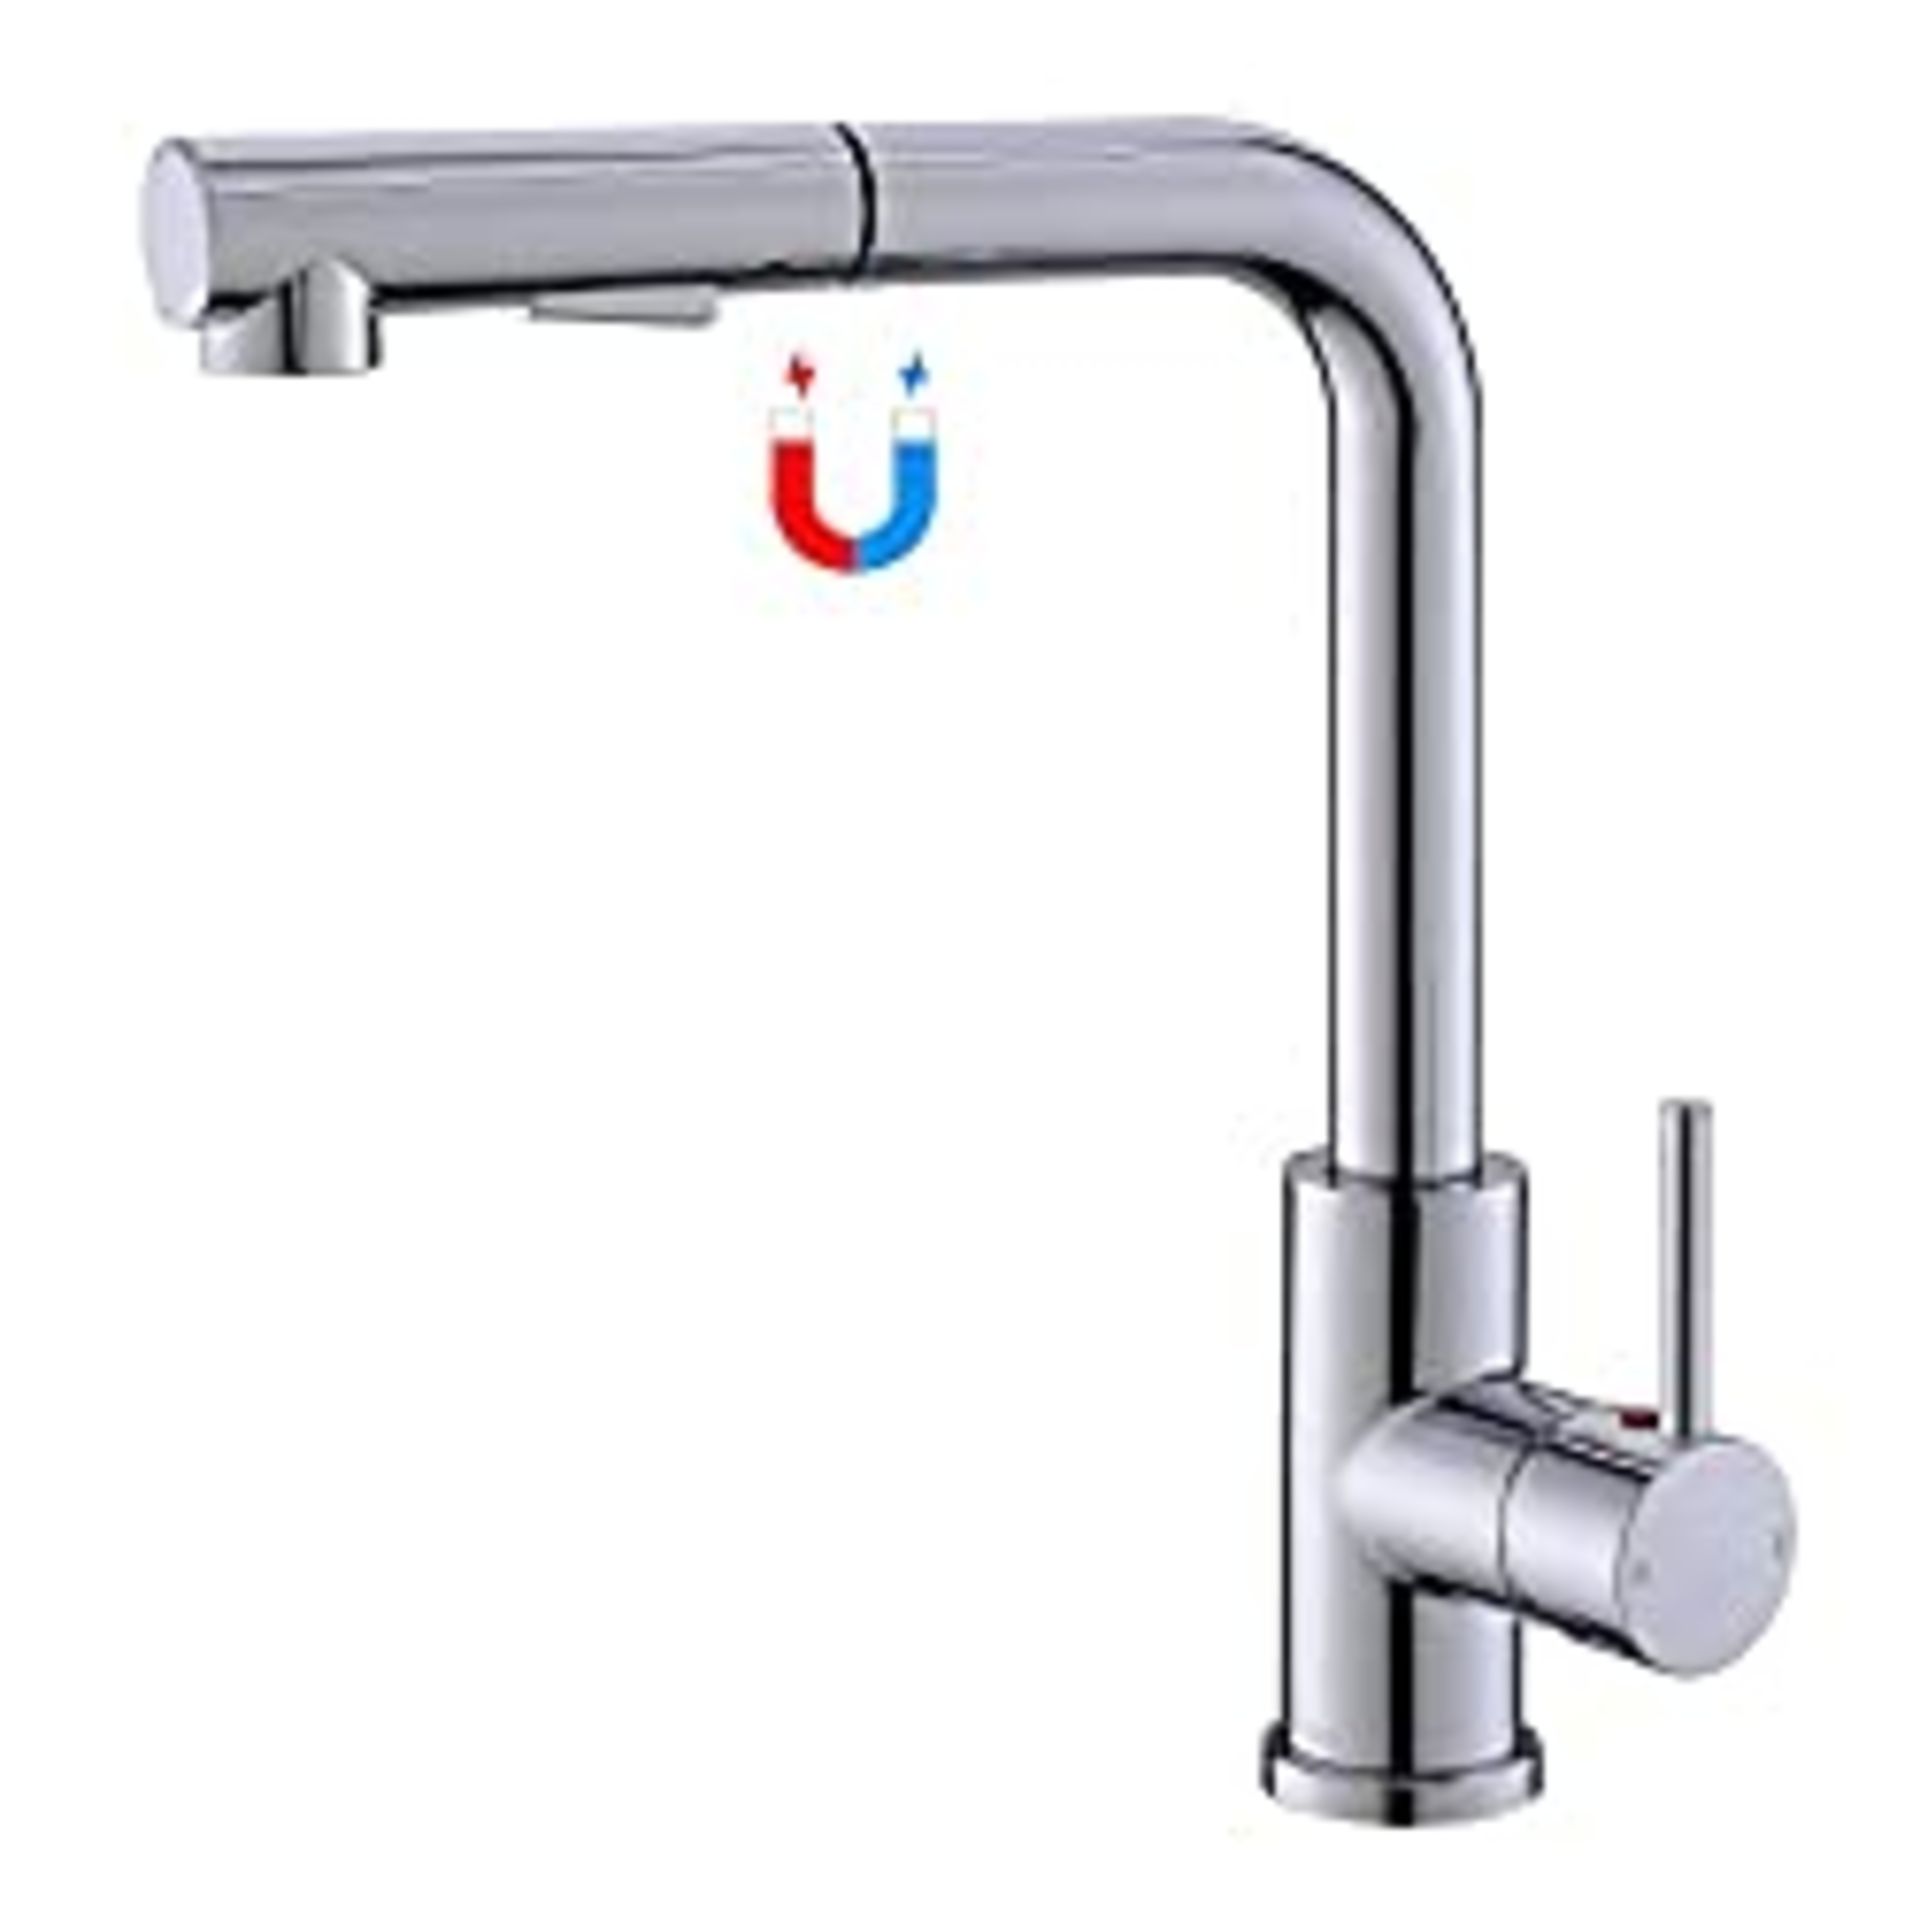 RRP £55.99 Tohlar Kitchen Sink Mixer Taps Chrome with Magnetic